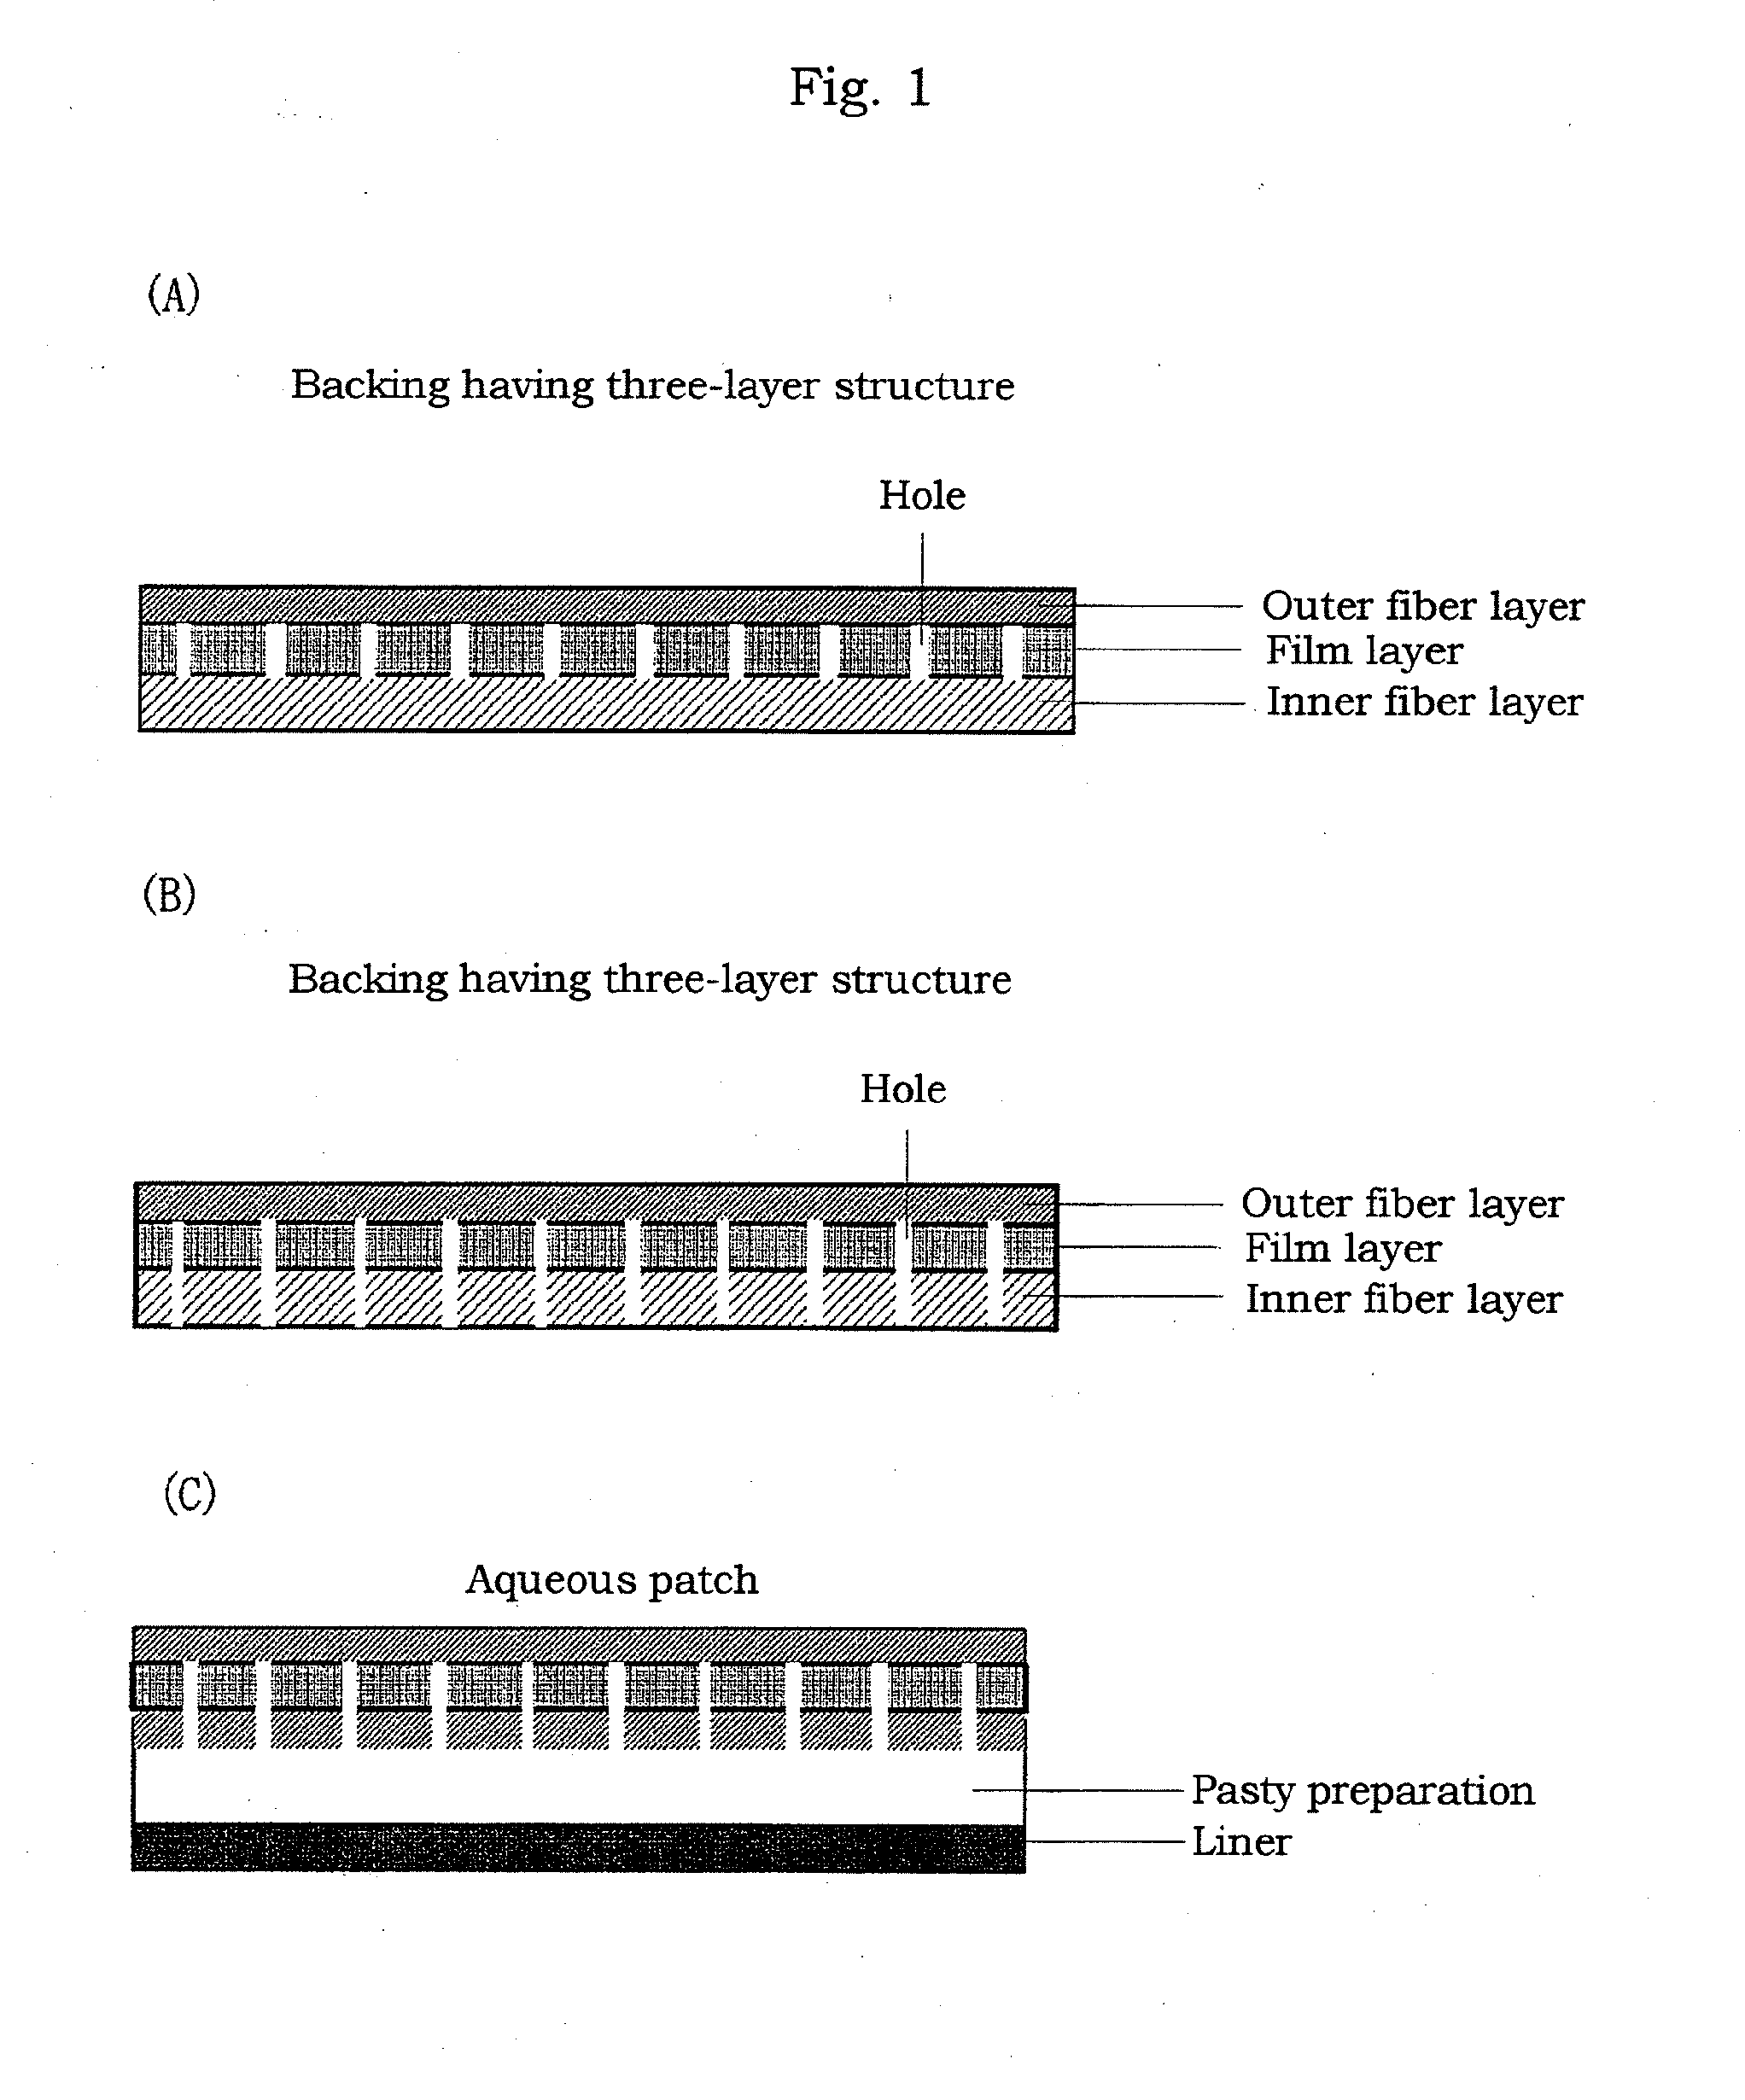 Backing having three-layer structure and aqueous patch using the backing